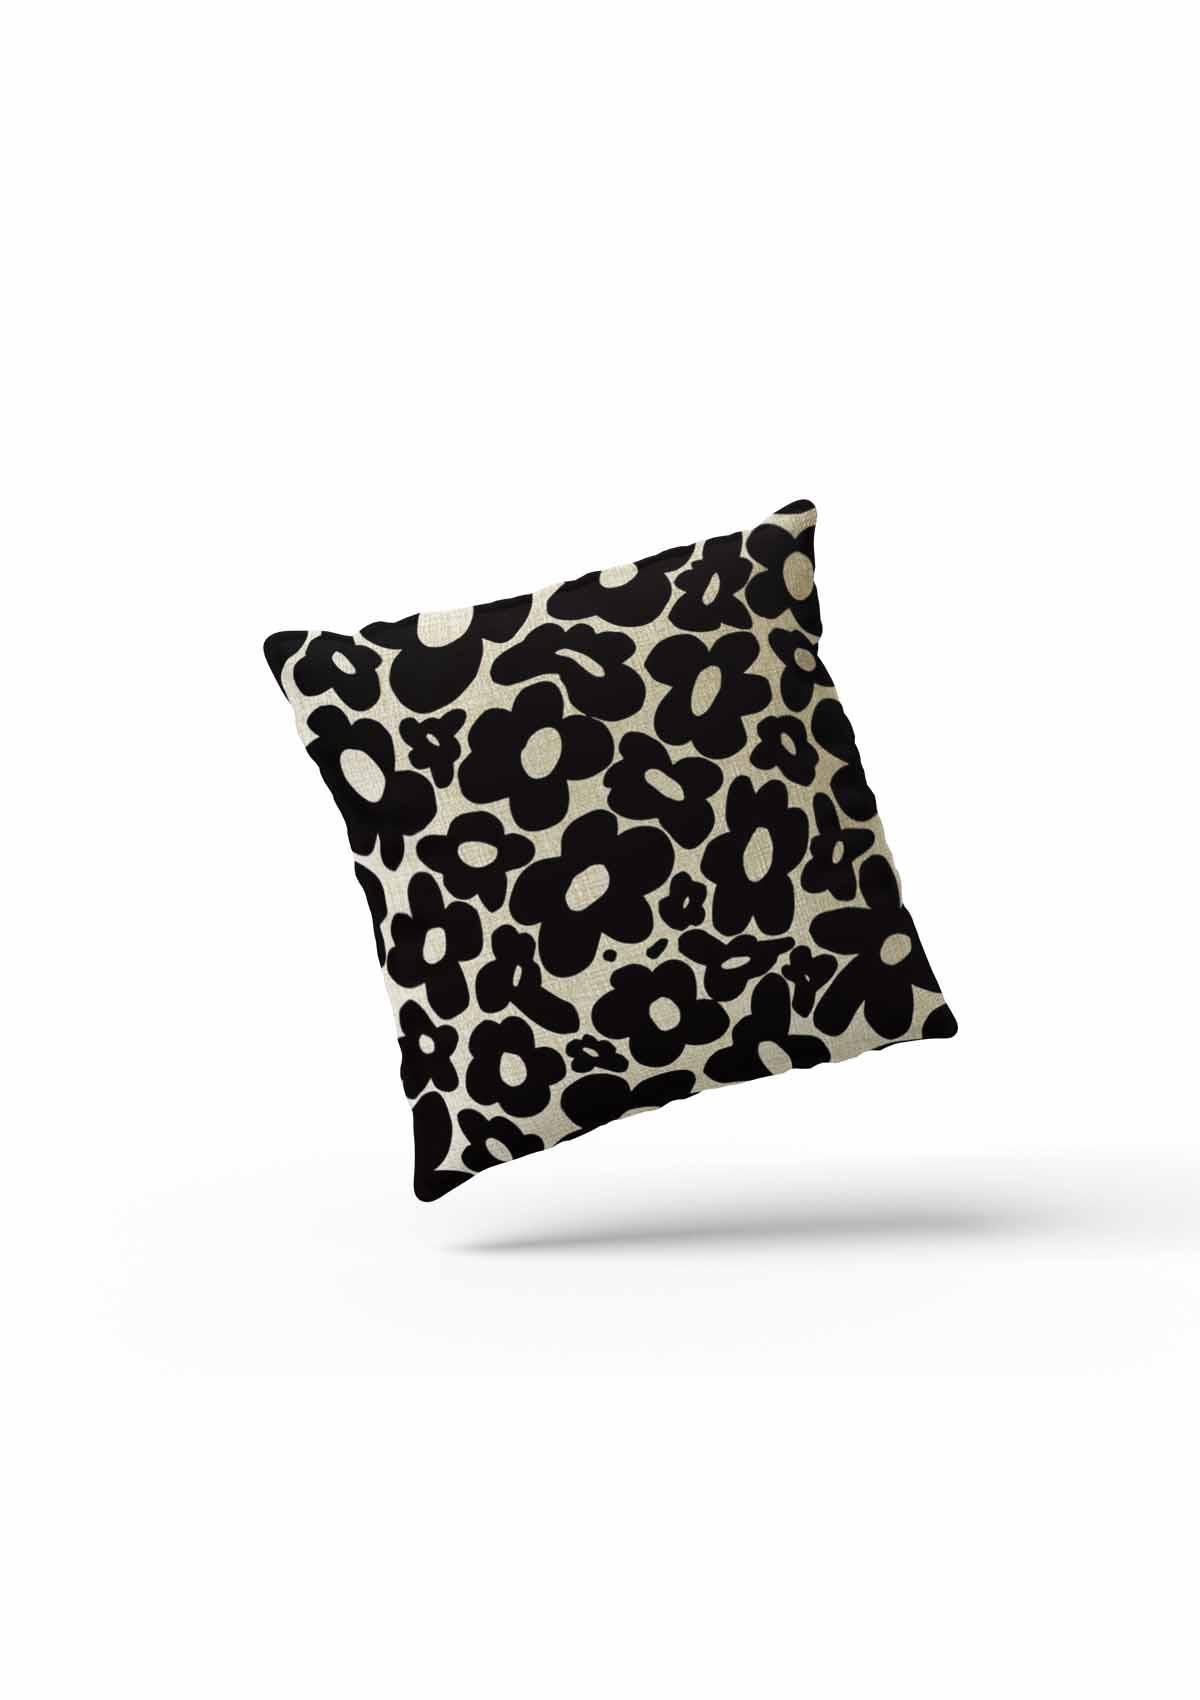 Black and White "Blooms" Flower Cushion Covers